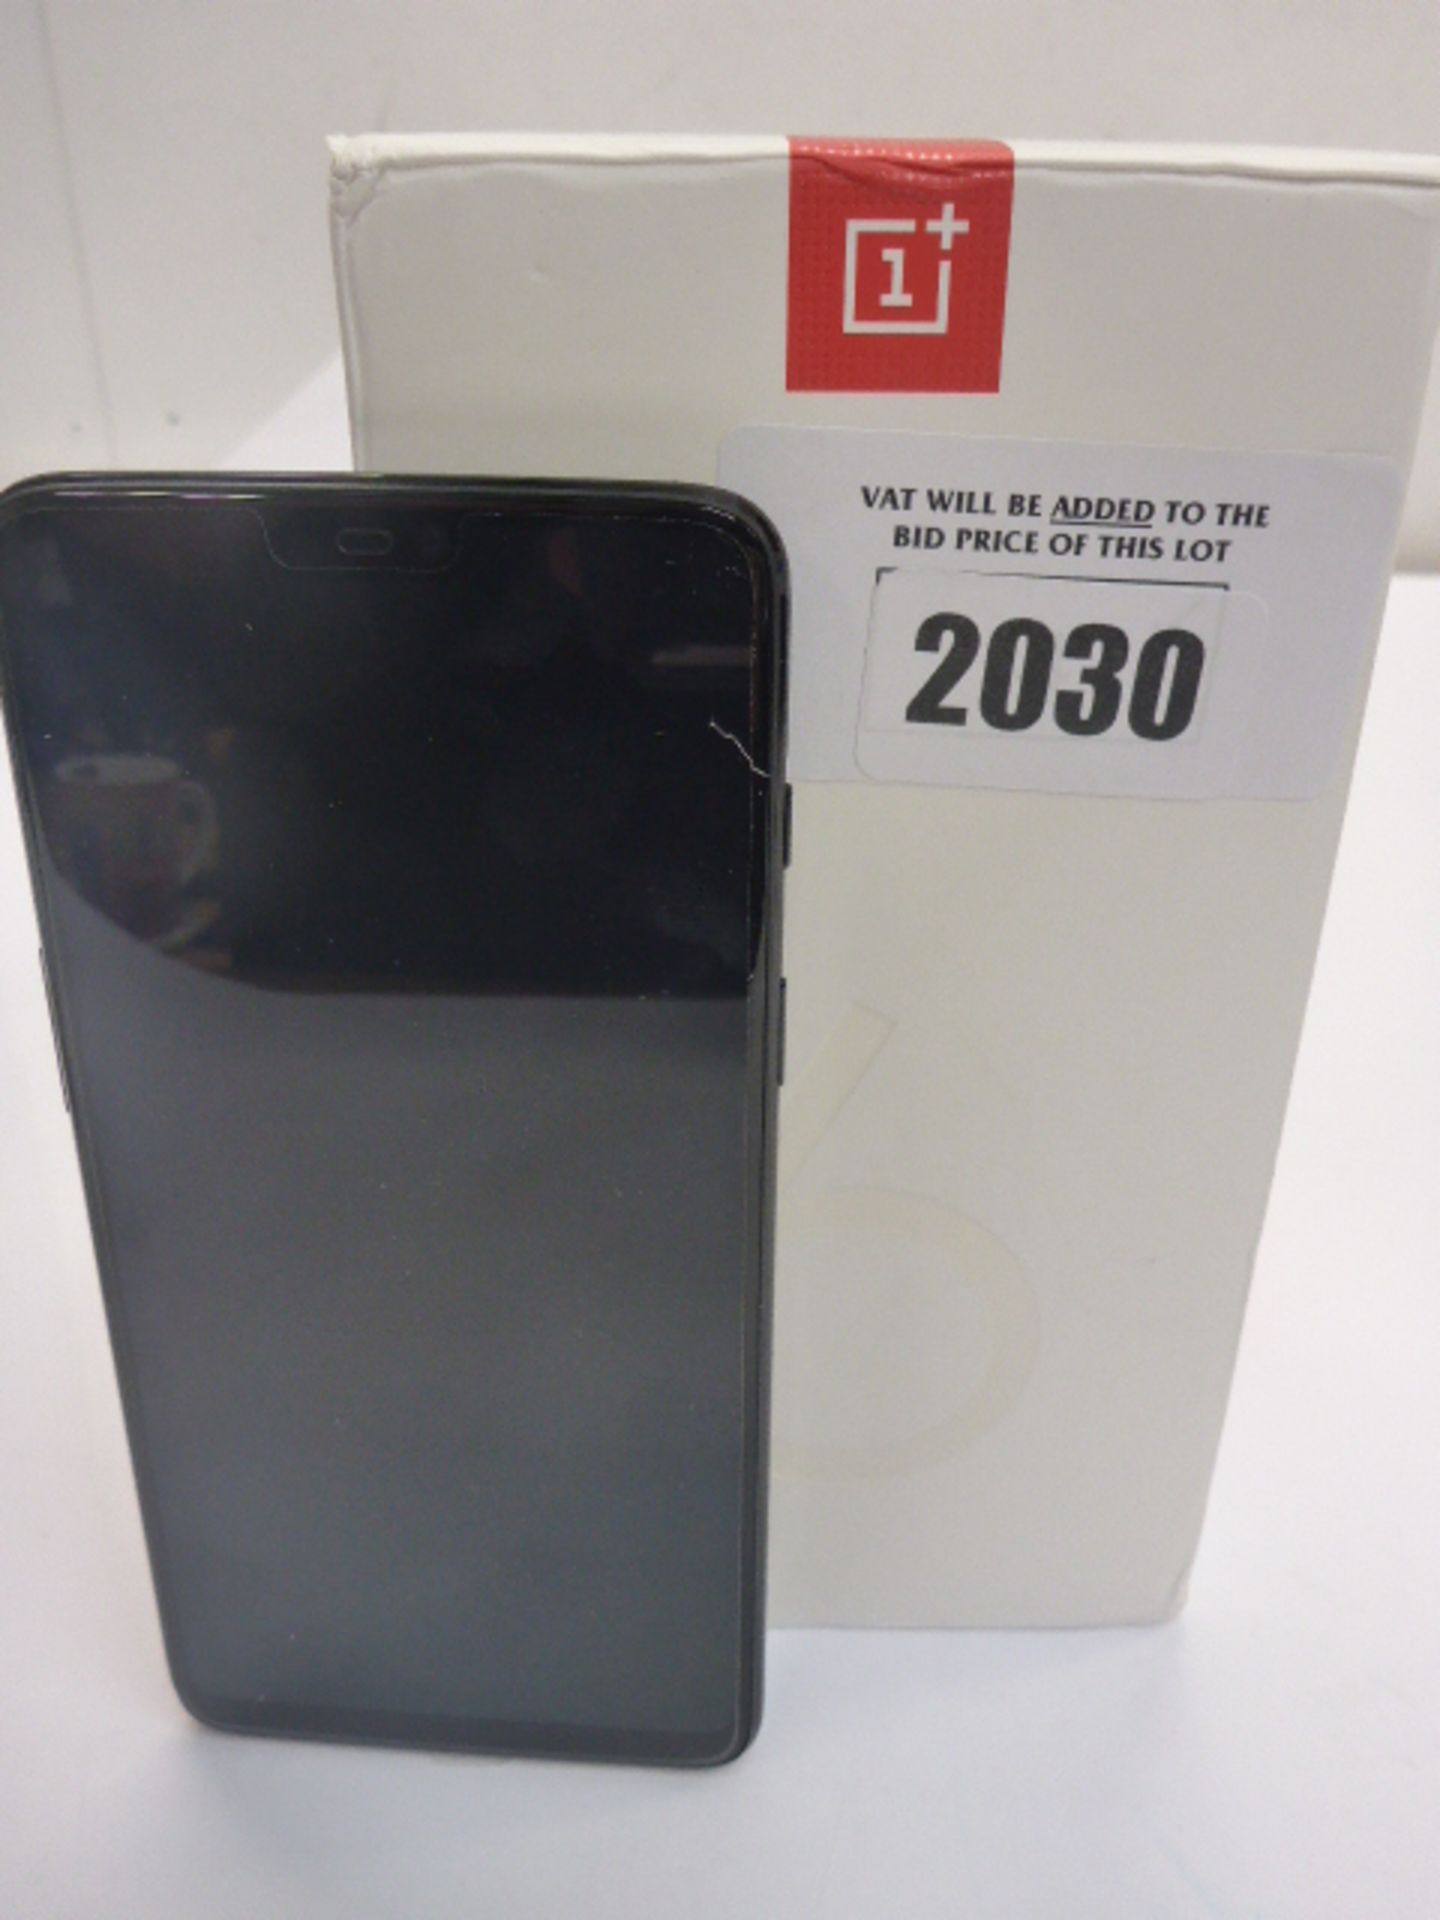 OnePLus 6 Android mobile phone, Dual Camera, 128GB storage, with box.